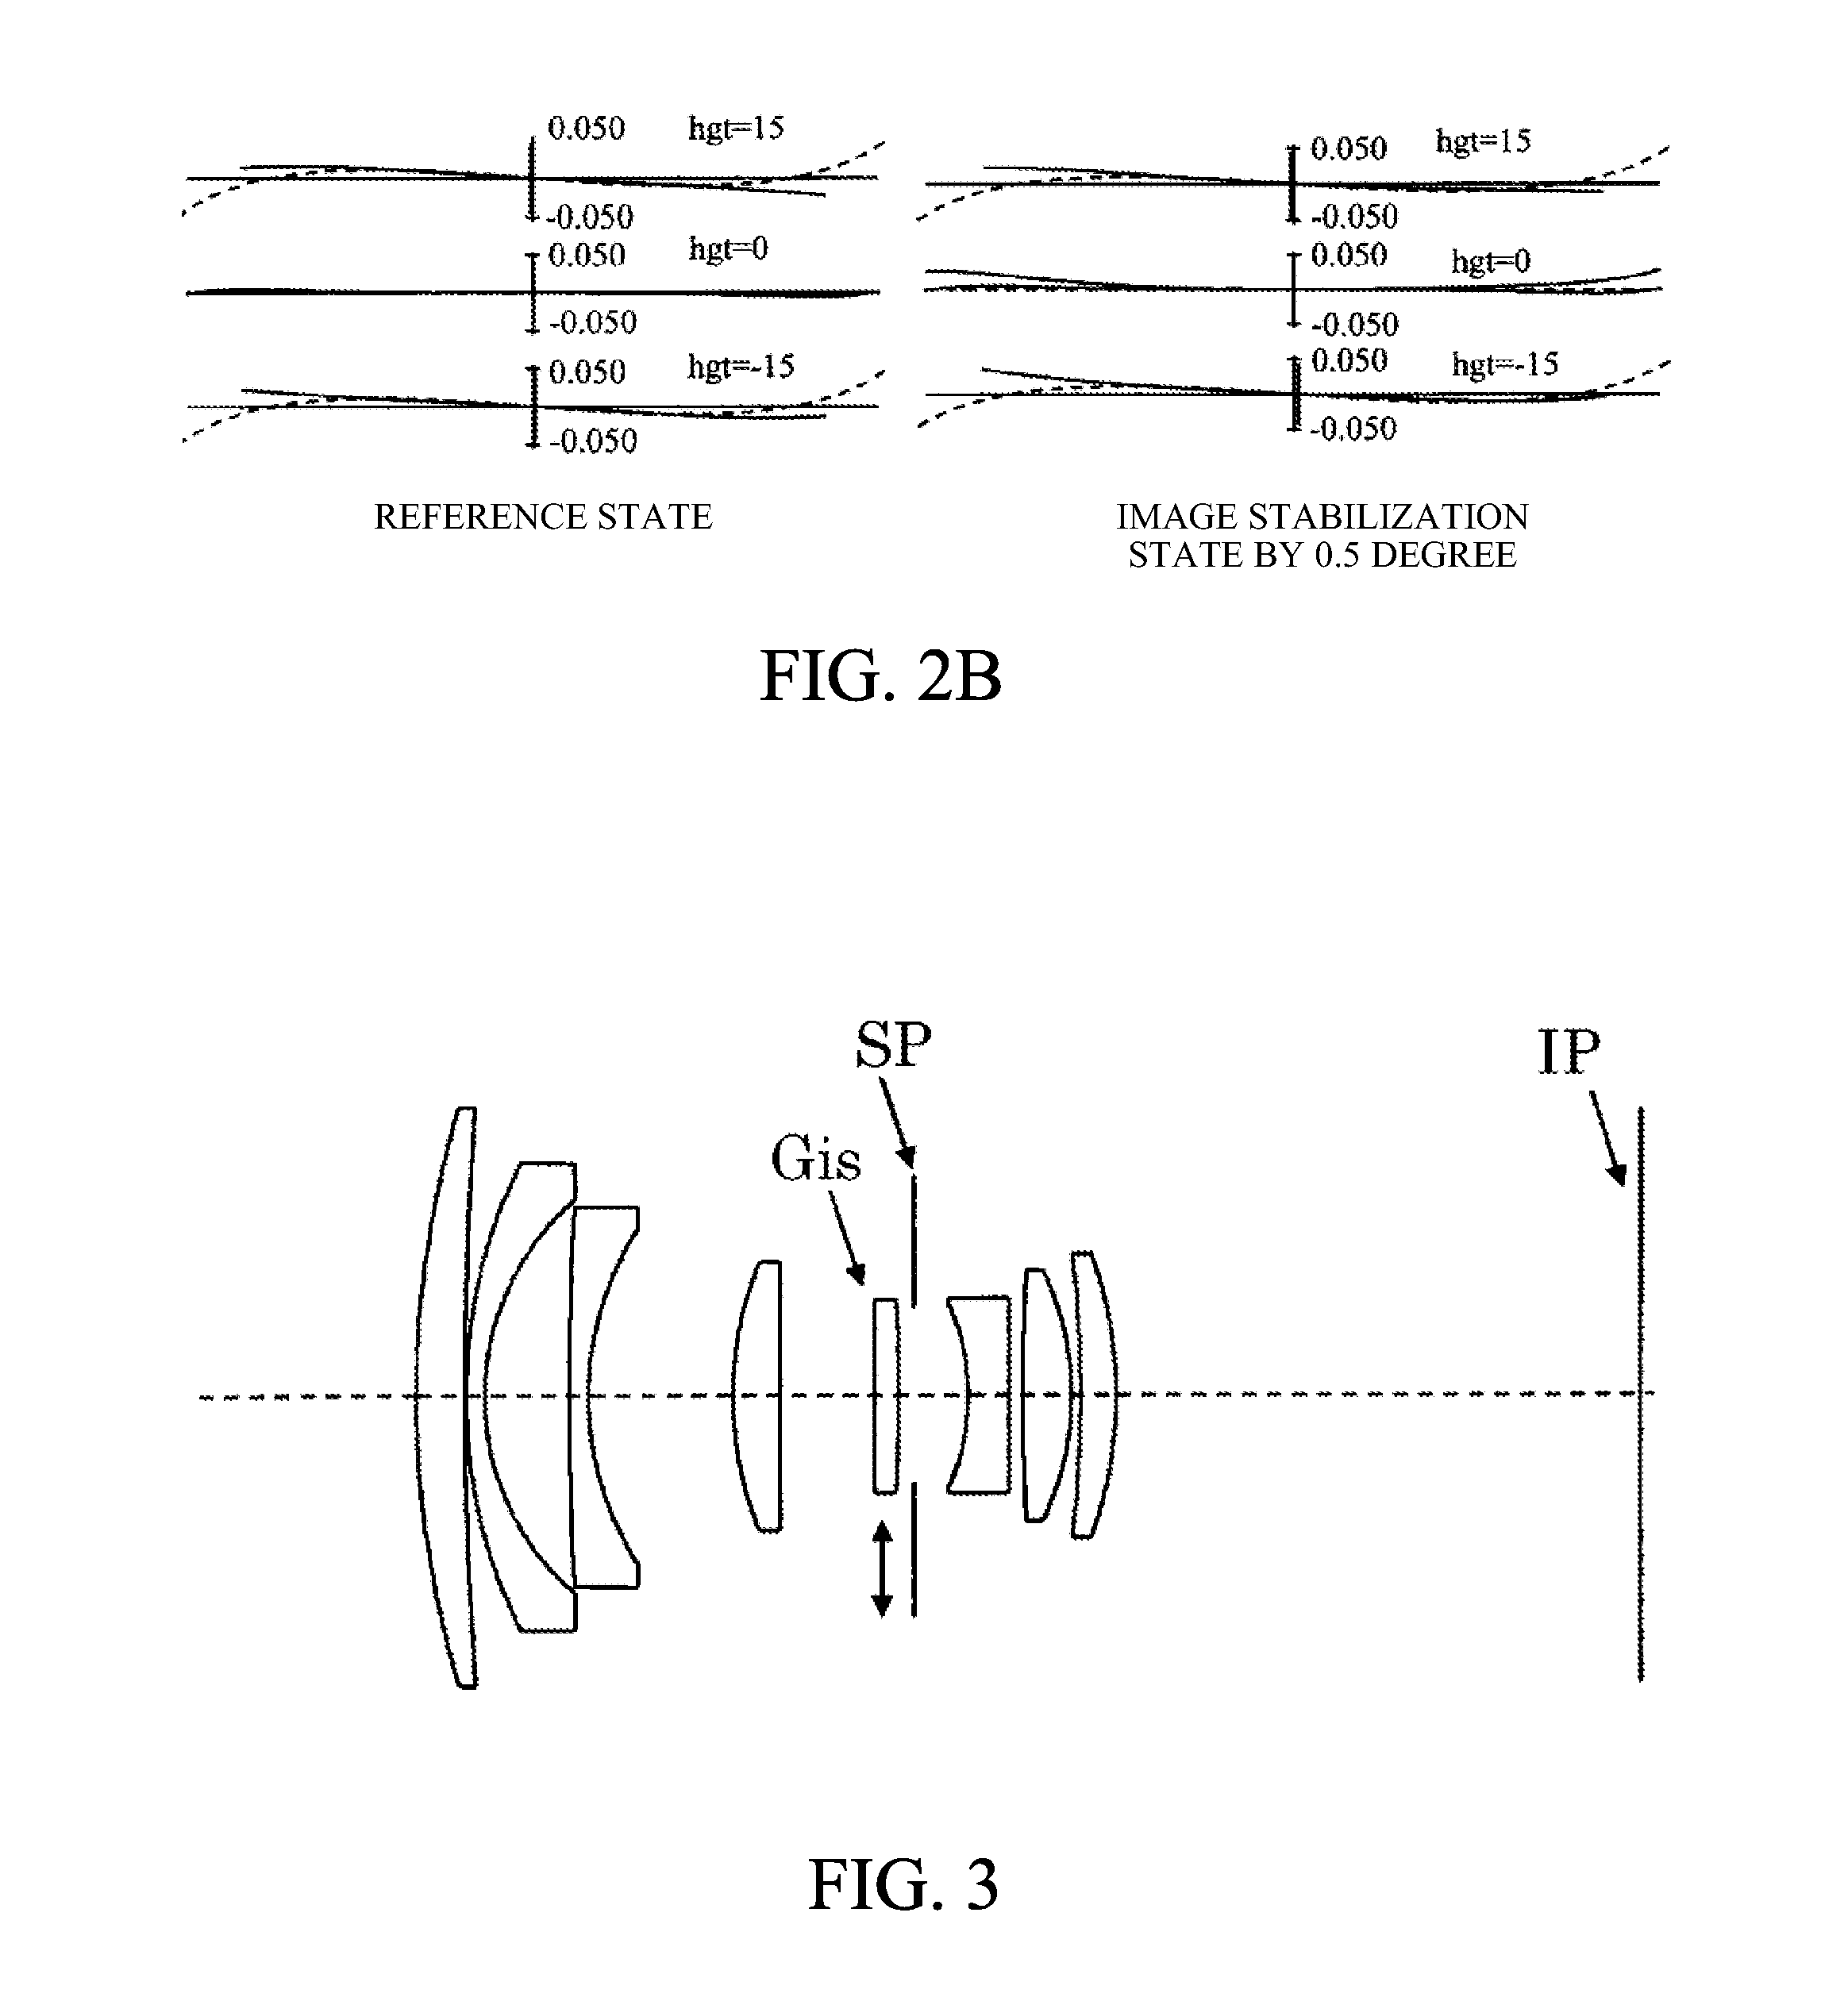 Fixed focal length lens having image stabilization function